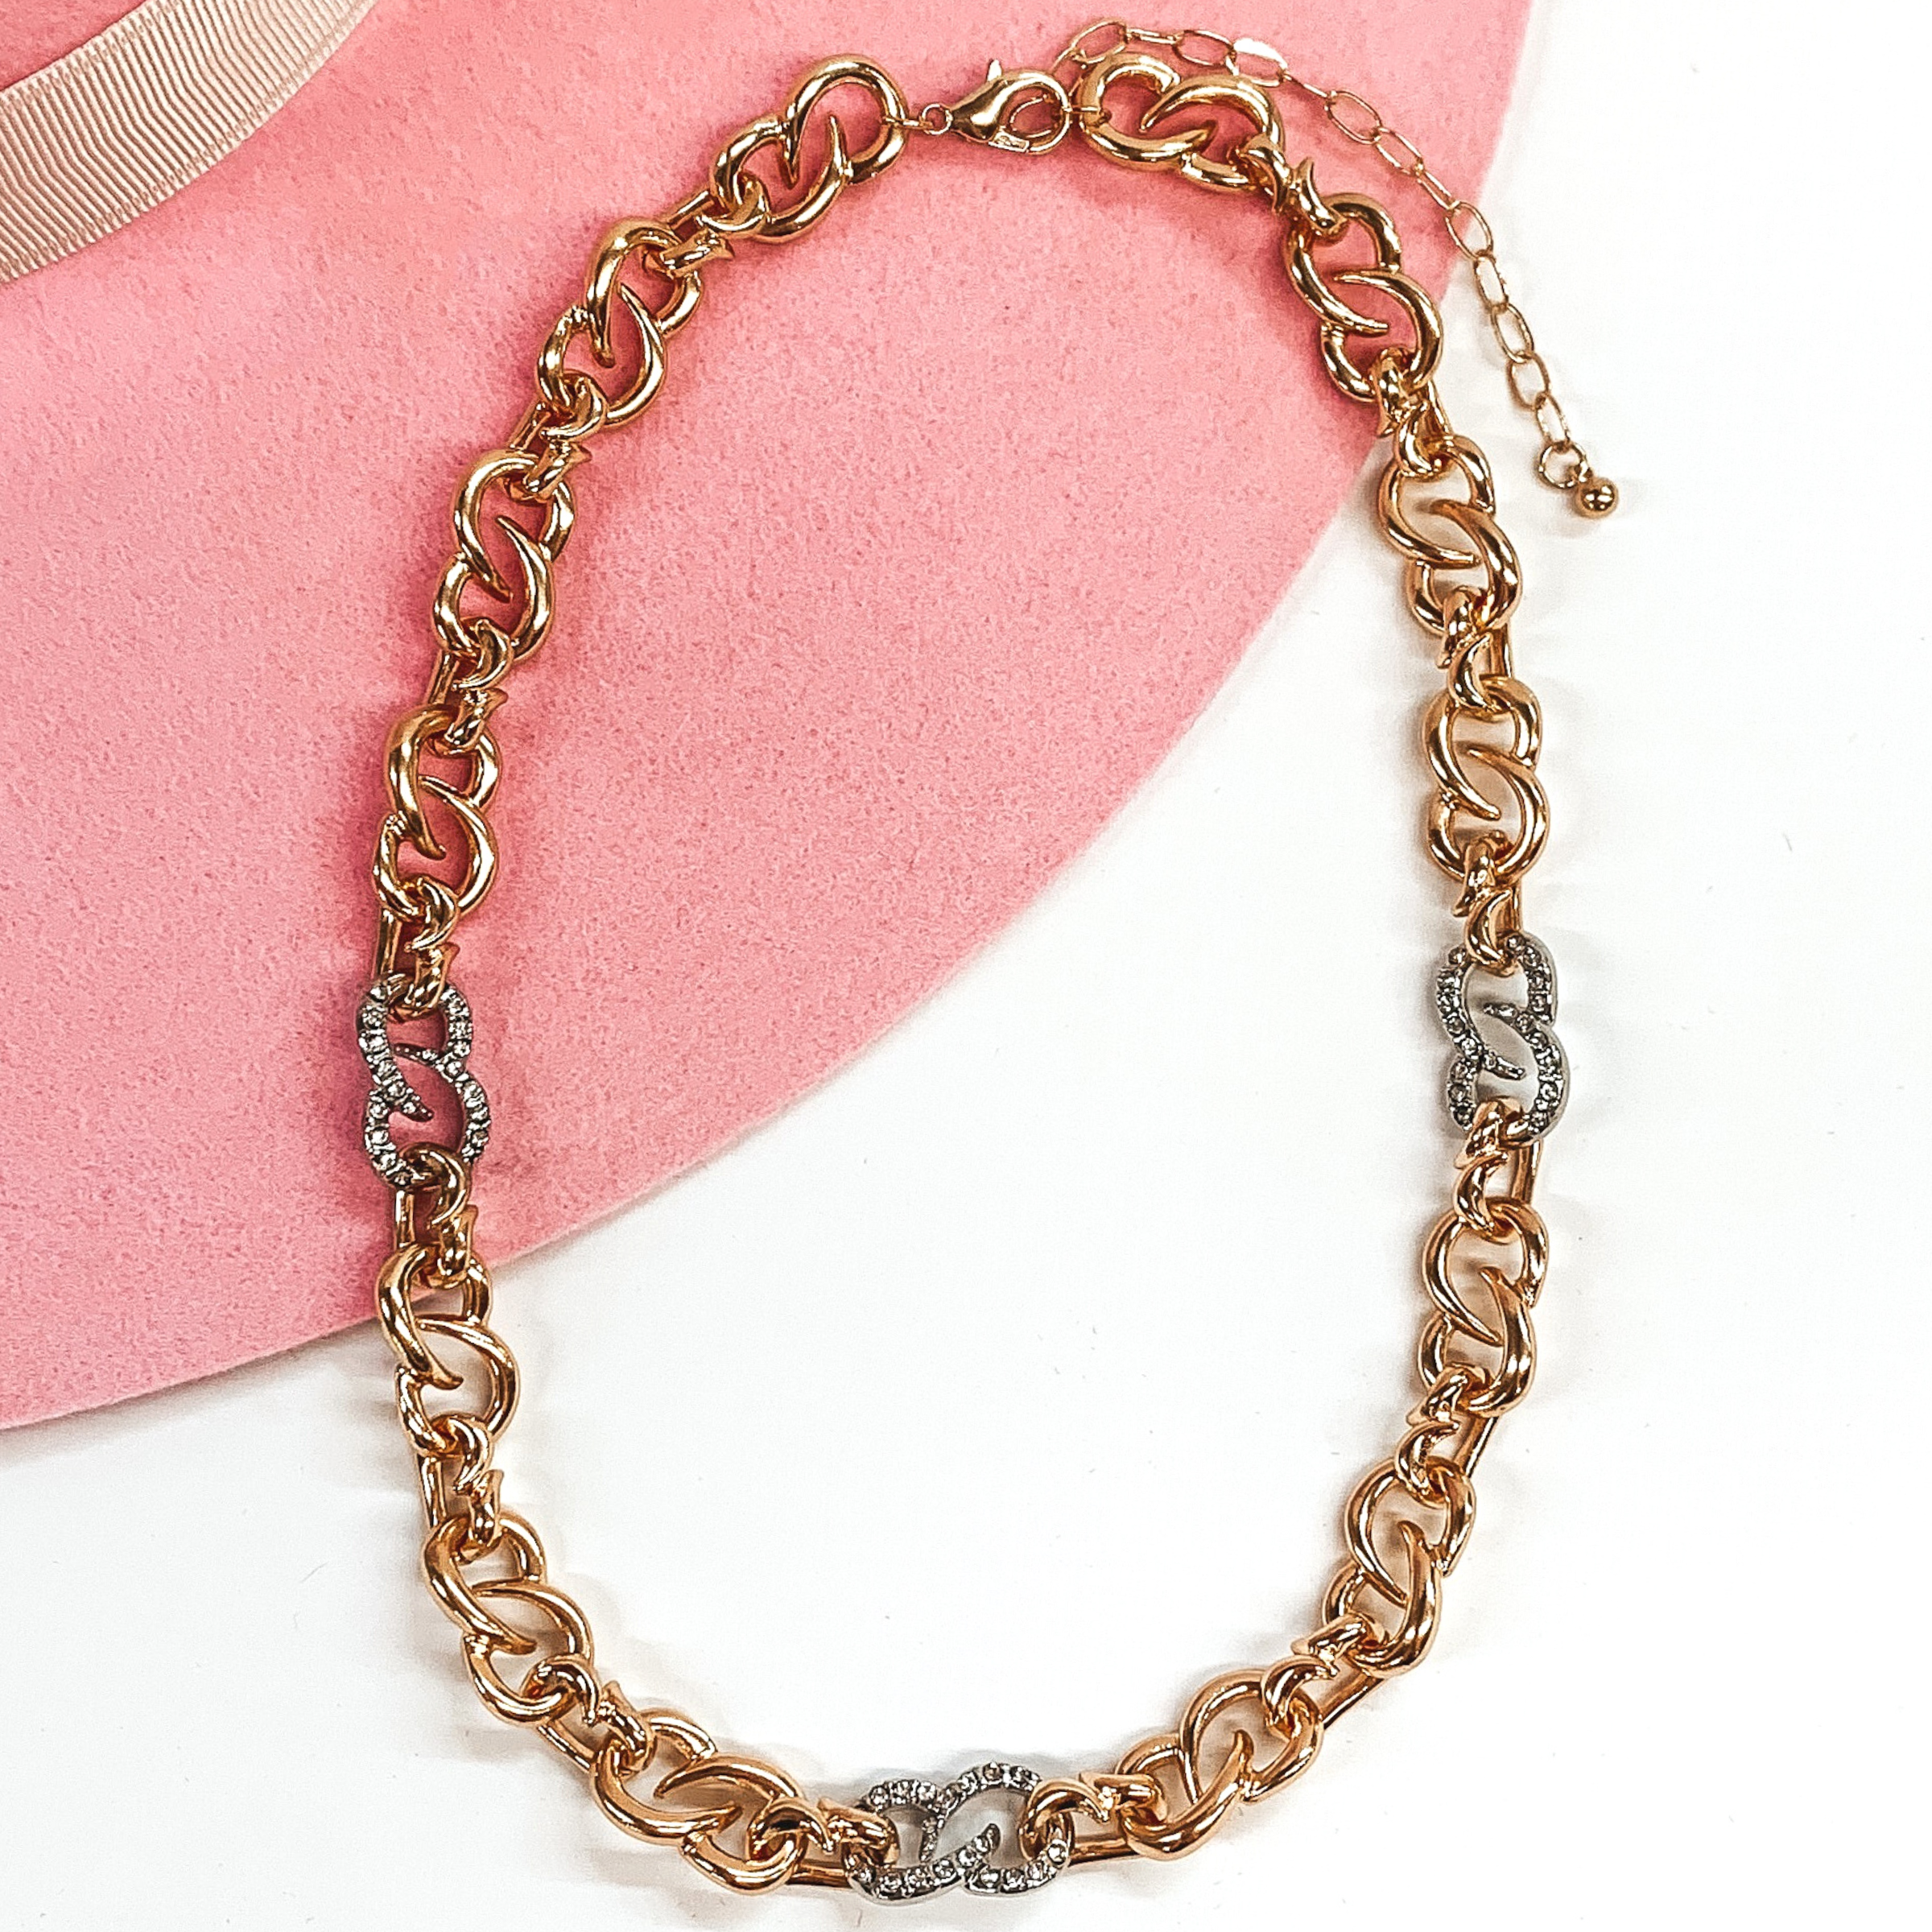 Thick gold infinity chain link necklace with three silver links that have clear crystals. this necklace is pictured on a white and pink background. 